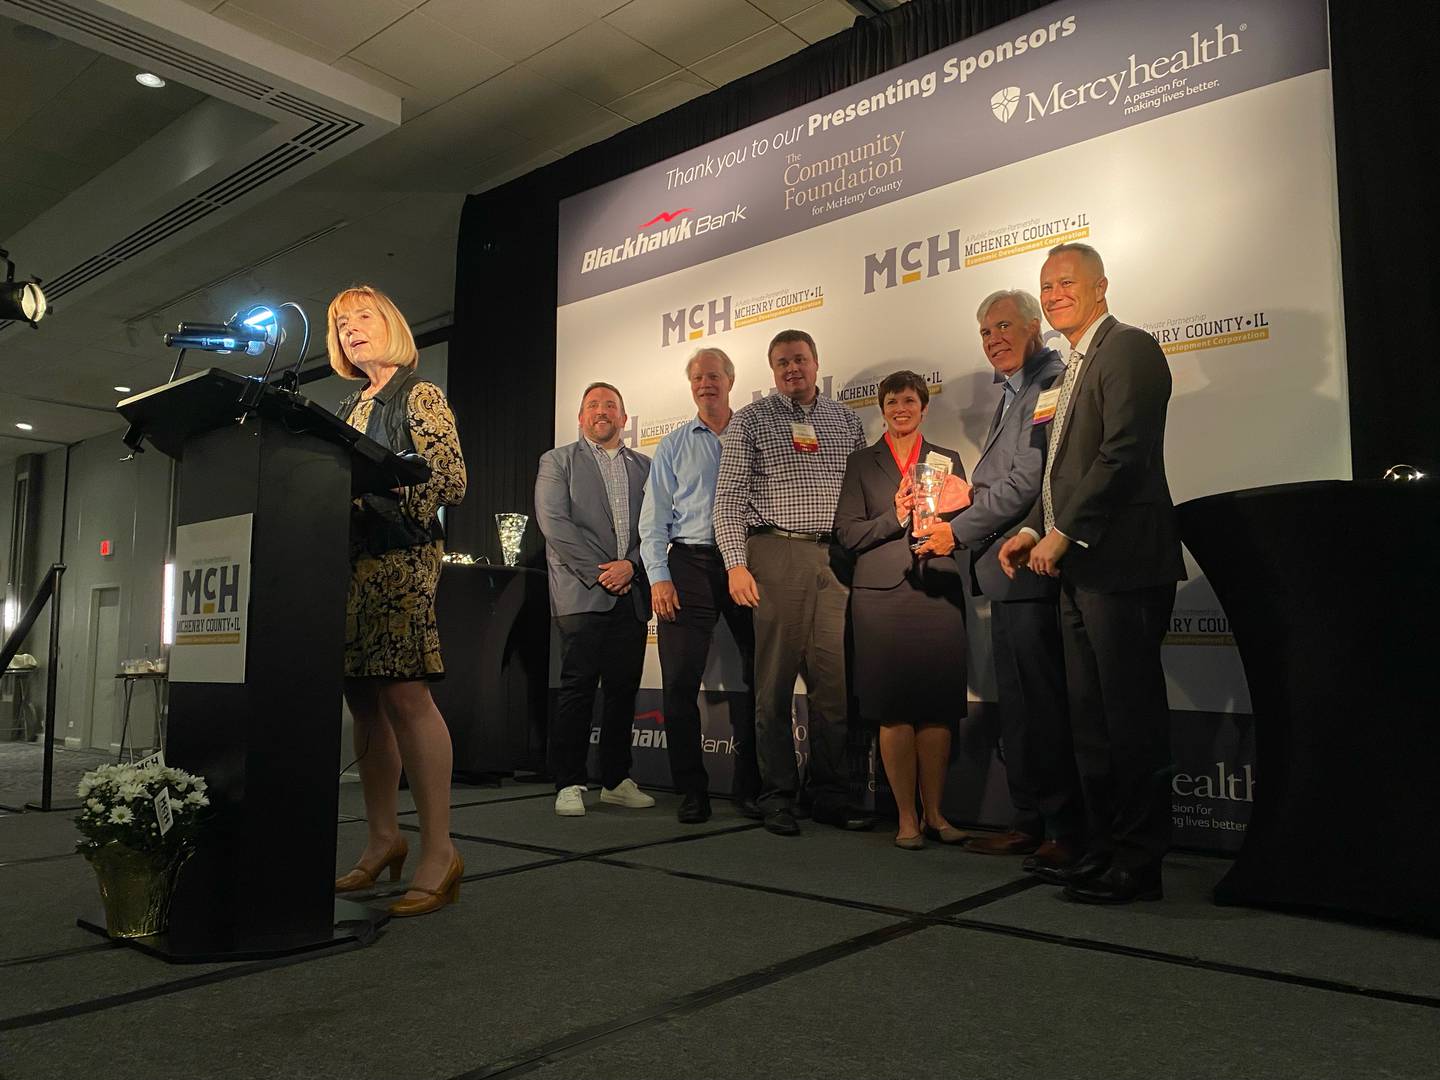 Mercyhealth, currently building a hospital in Crystal Lake, was honored as a Business Champion at the McHenry County Economic Development Corporation's  annual dinner on Tuesday, Nov. 1, 2022.